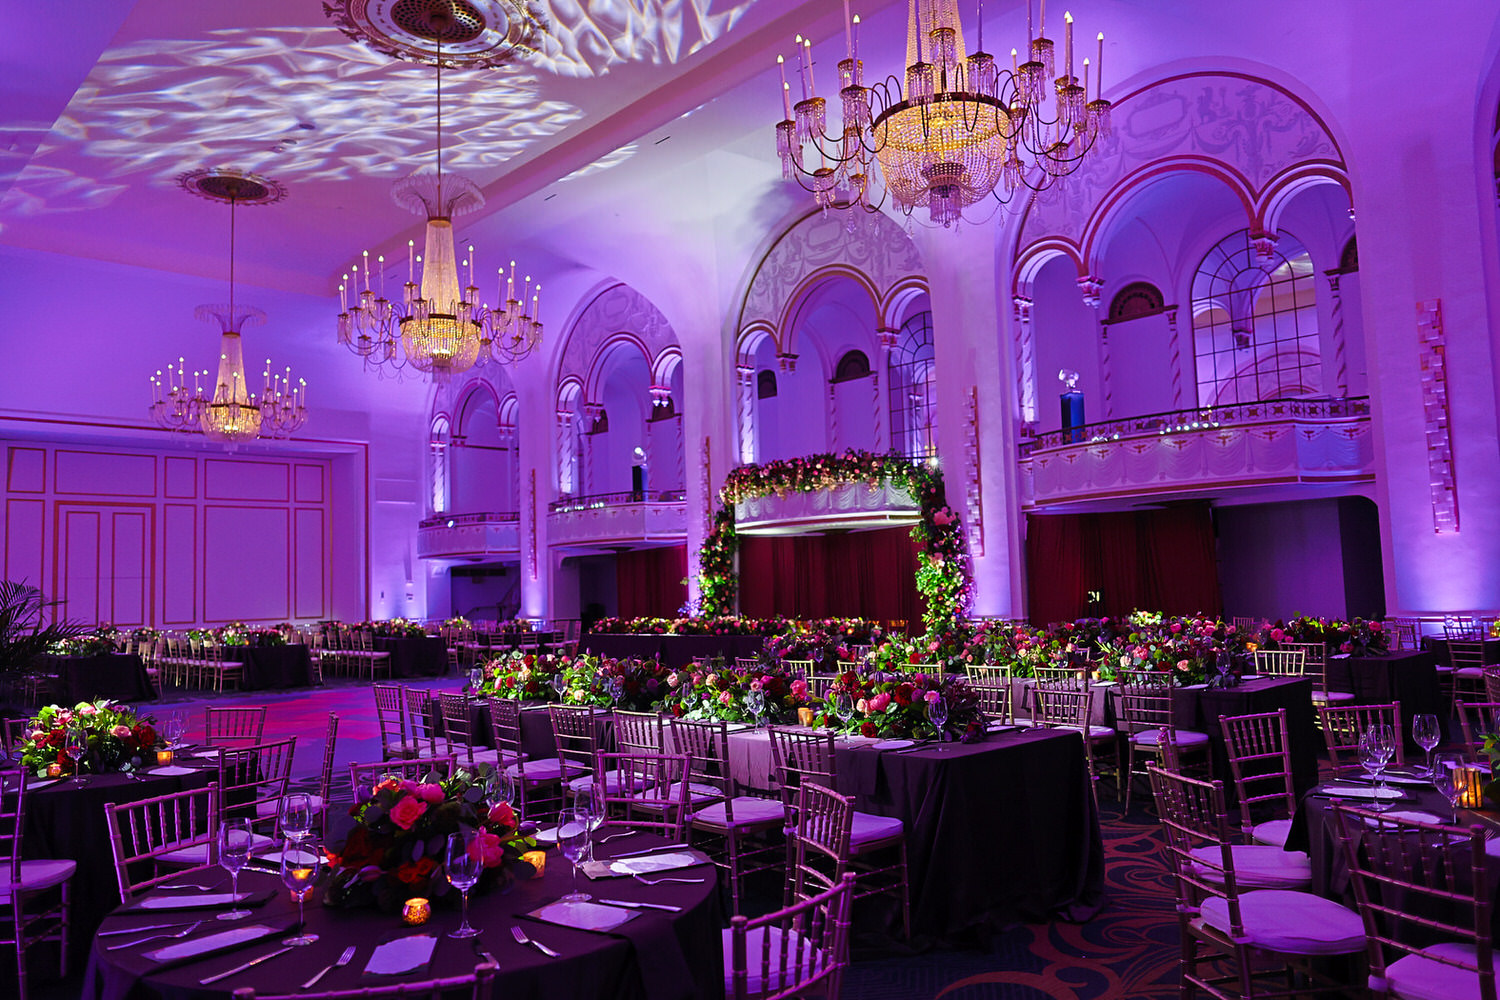 a banquet hall with tables and chairs and chandeliers.